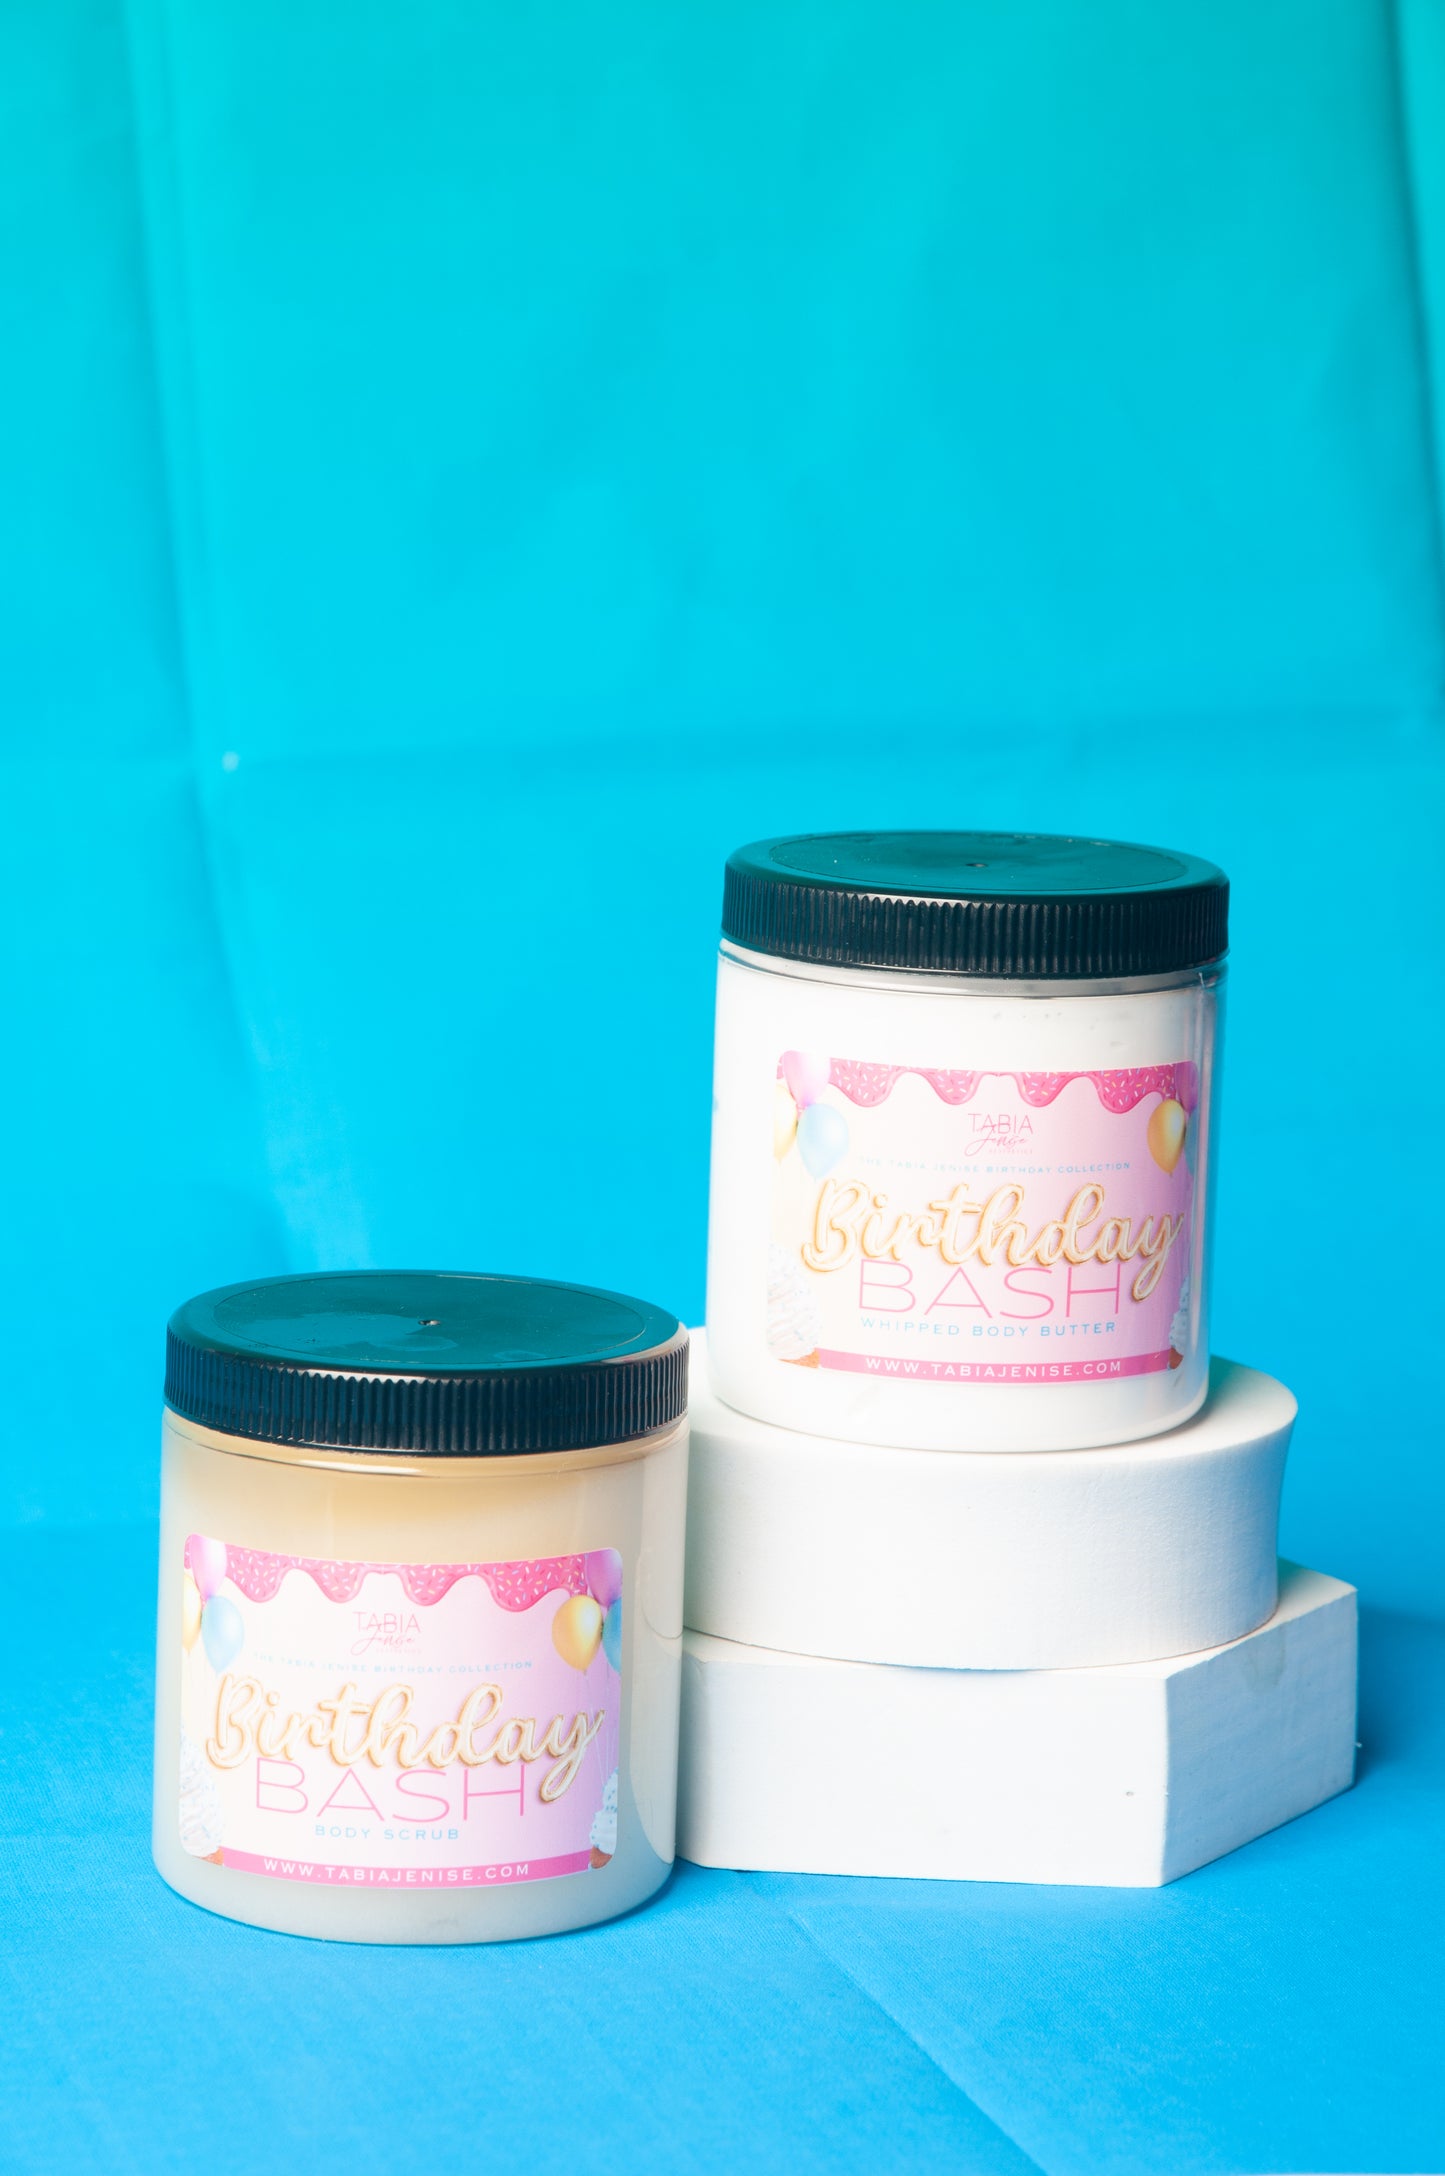 BIRTHDAY BASH WHIPPED BODY BUTTER